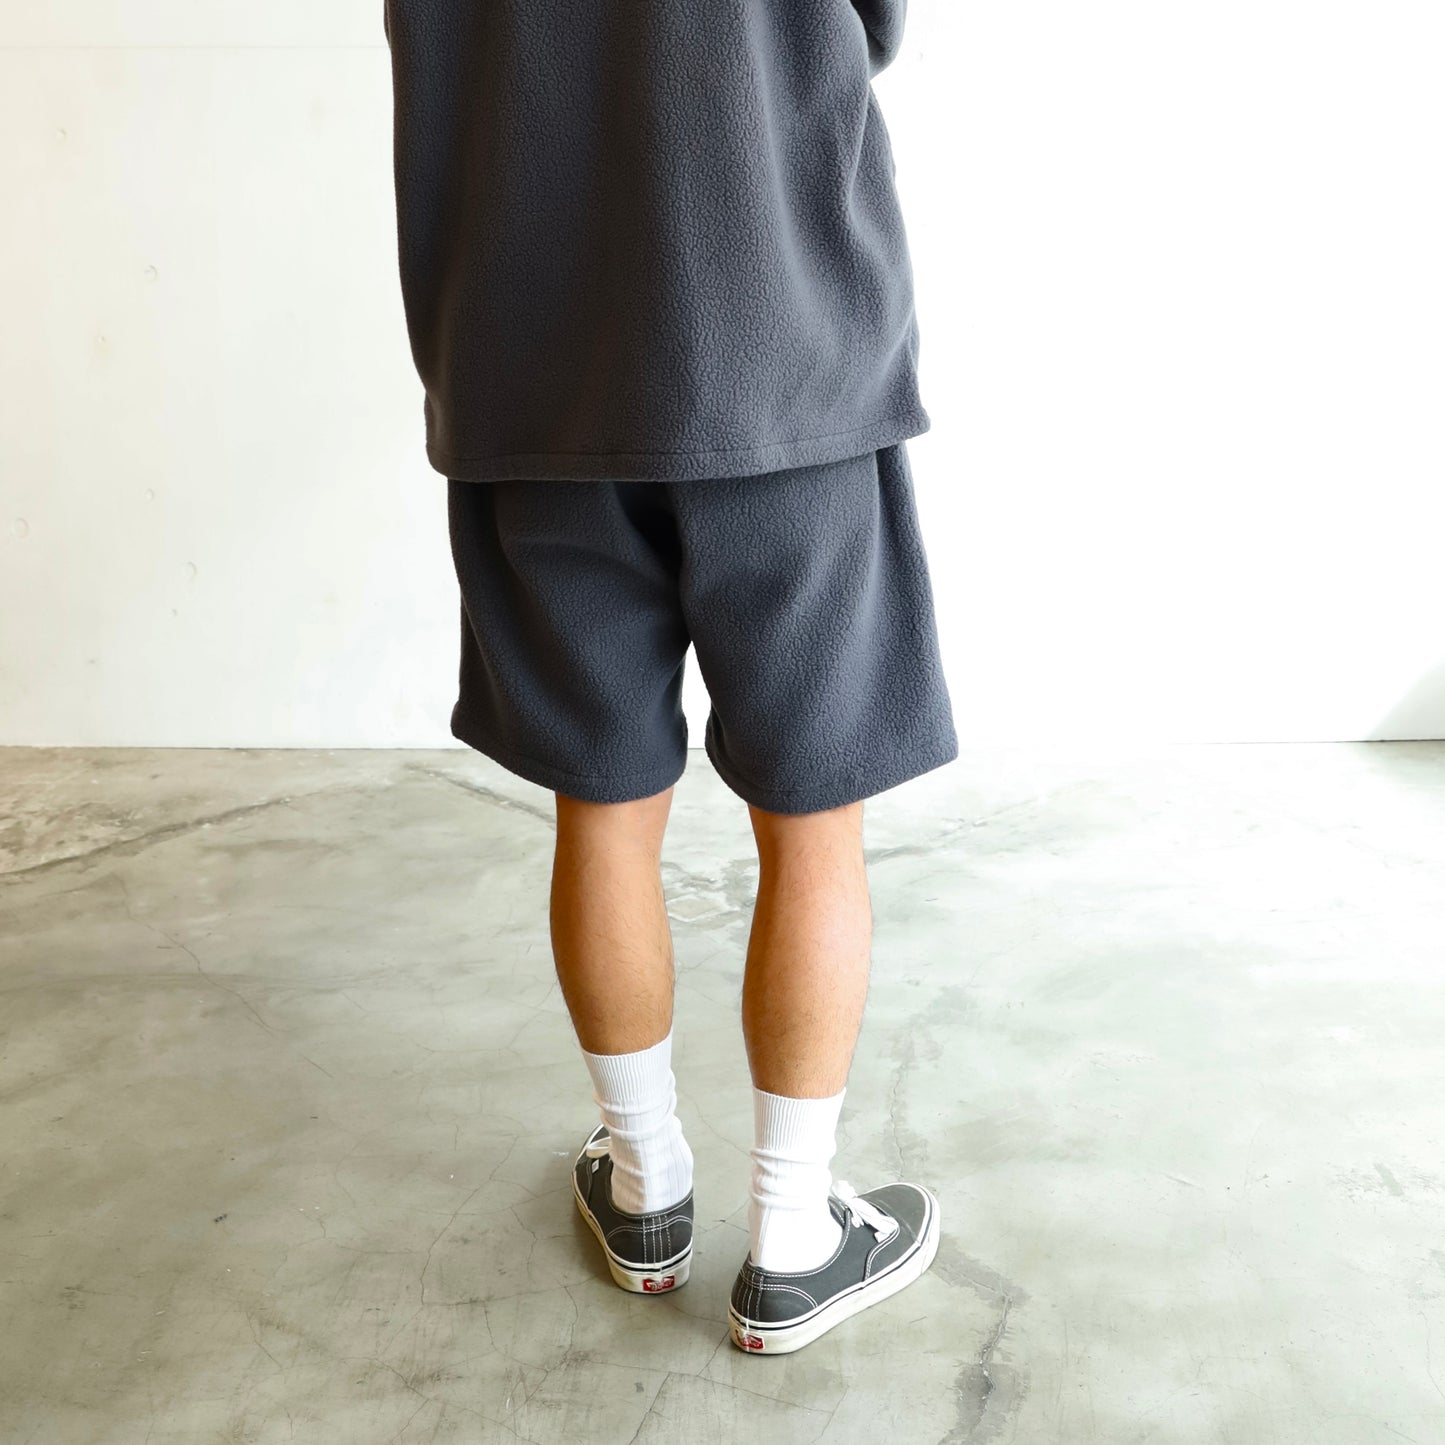 RELAX SHORTS Ⅱ (THERMAL PRO) - CHARCOAL